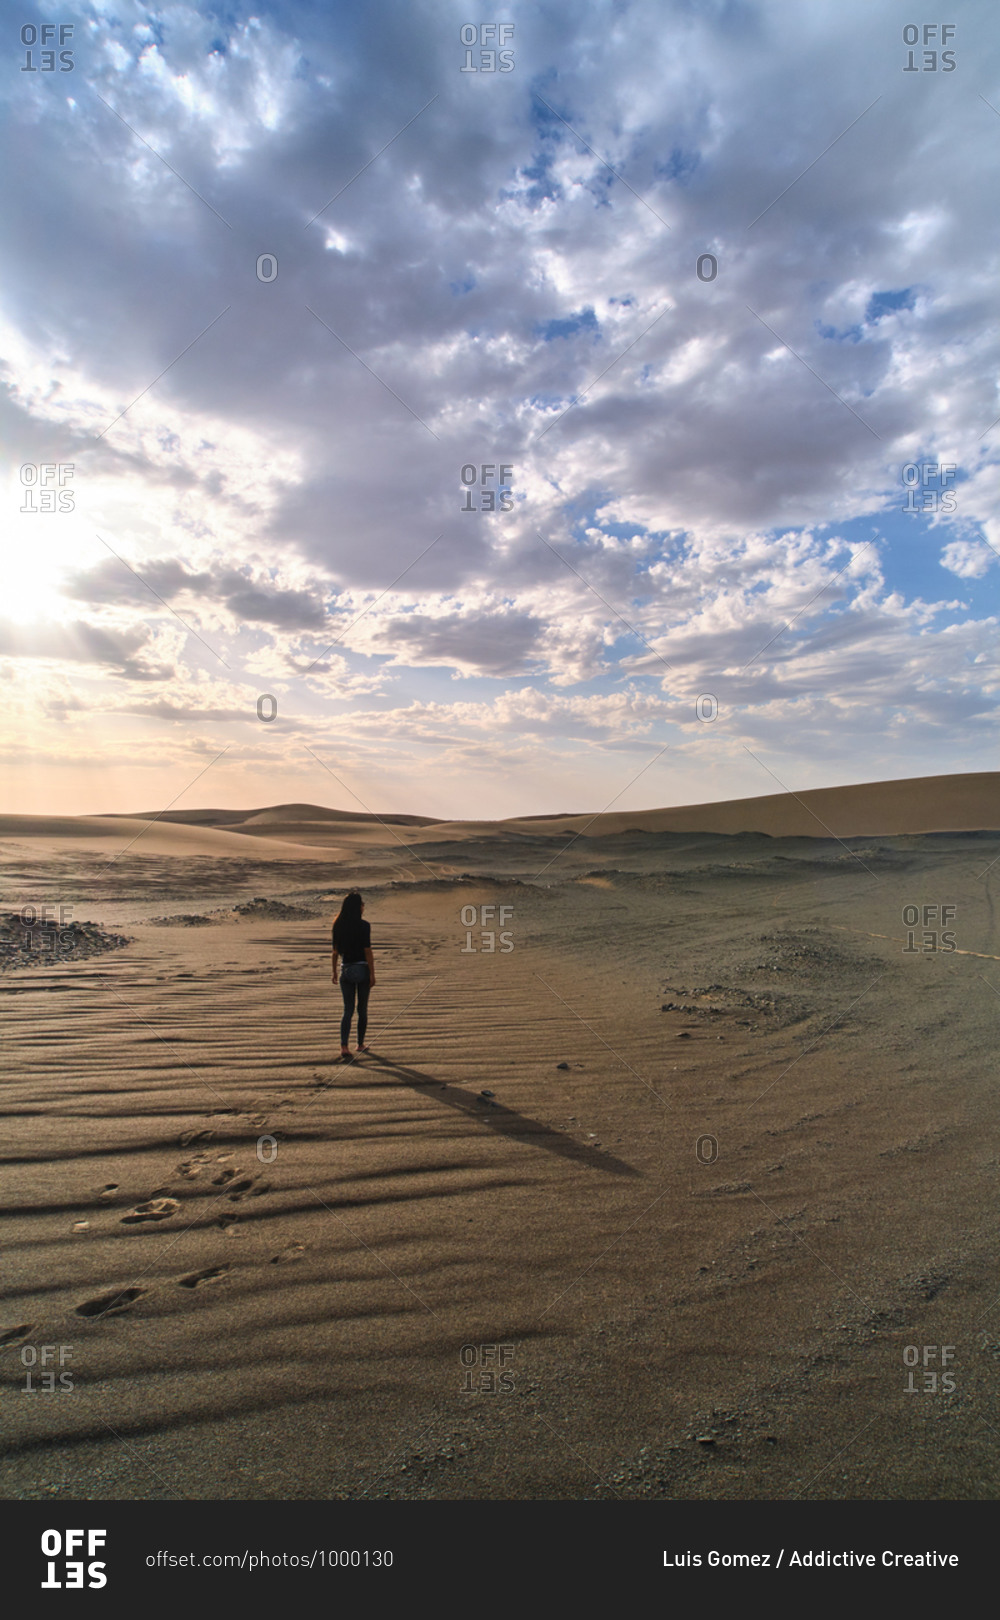 Anonymous female tourist strolling in sandy terrain in desert with dry wavy surface under cloudy sky at bright sundown